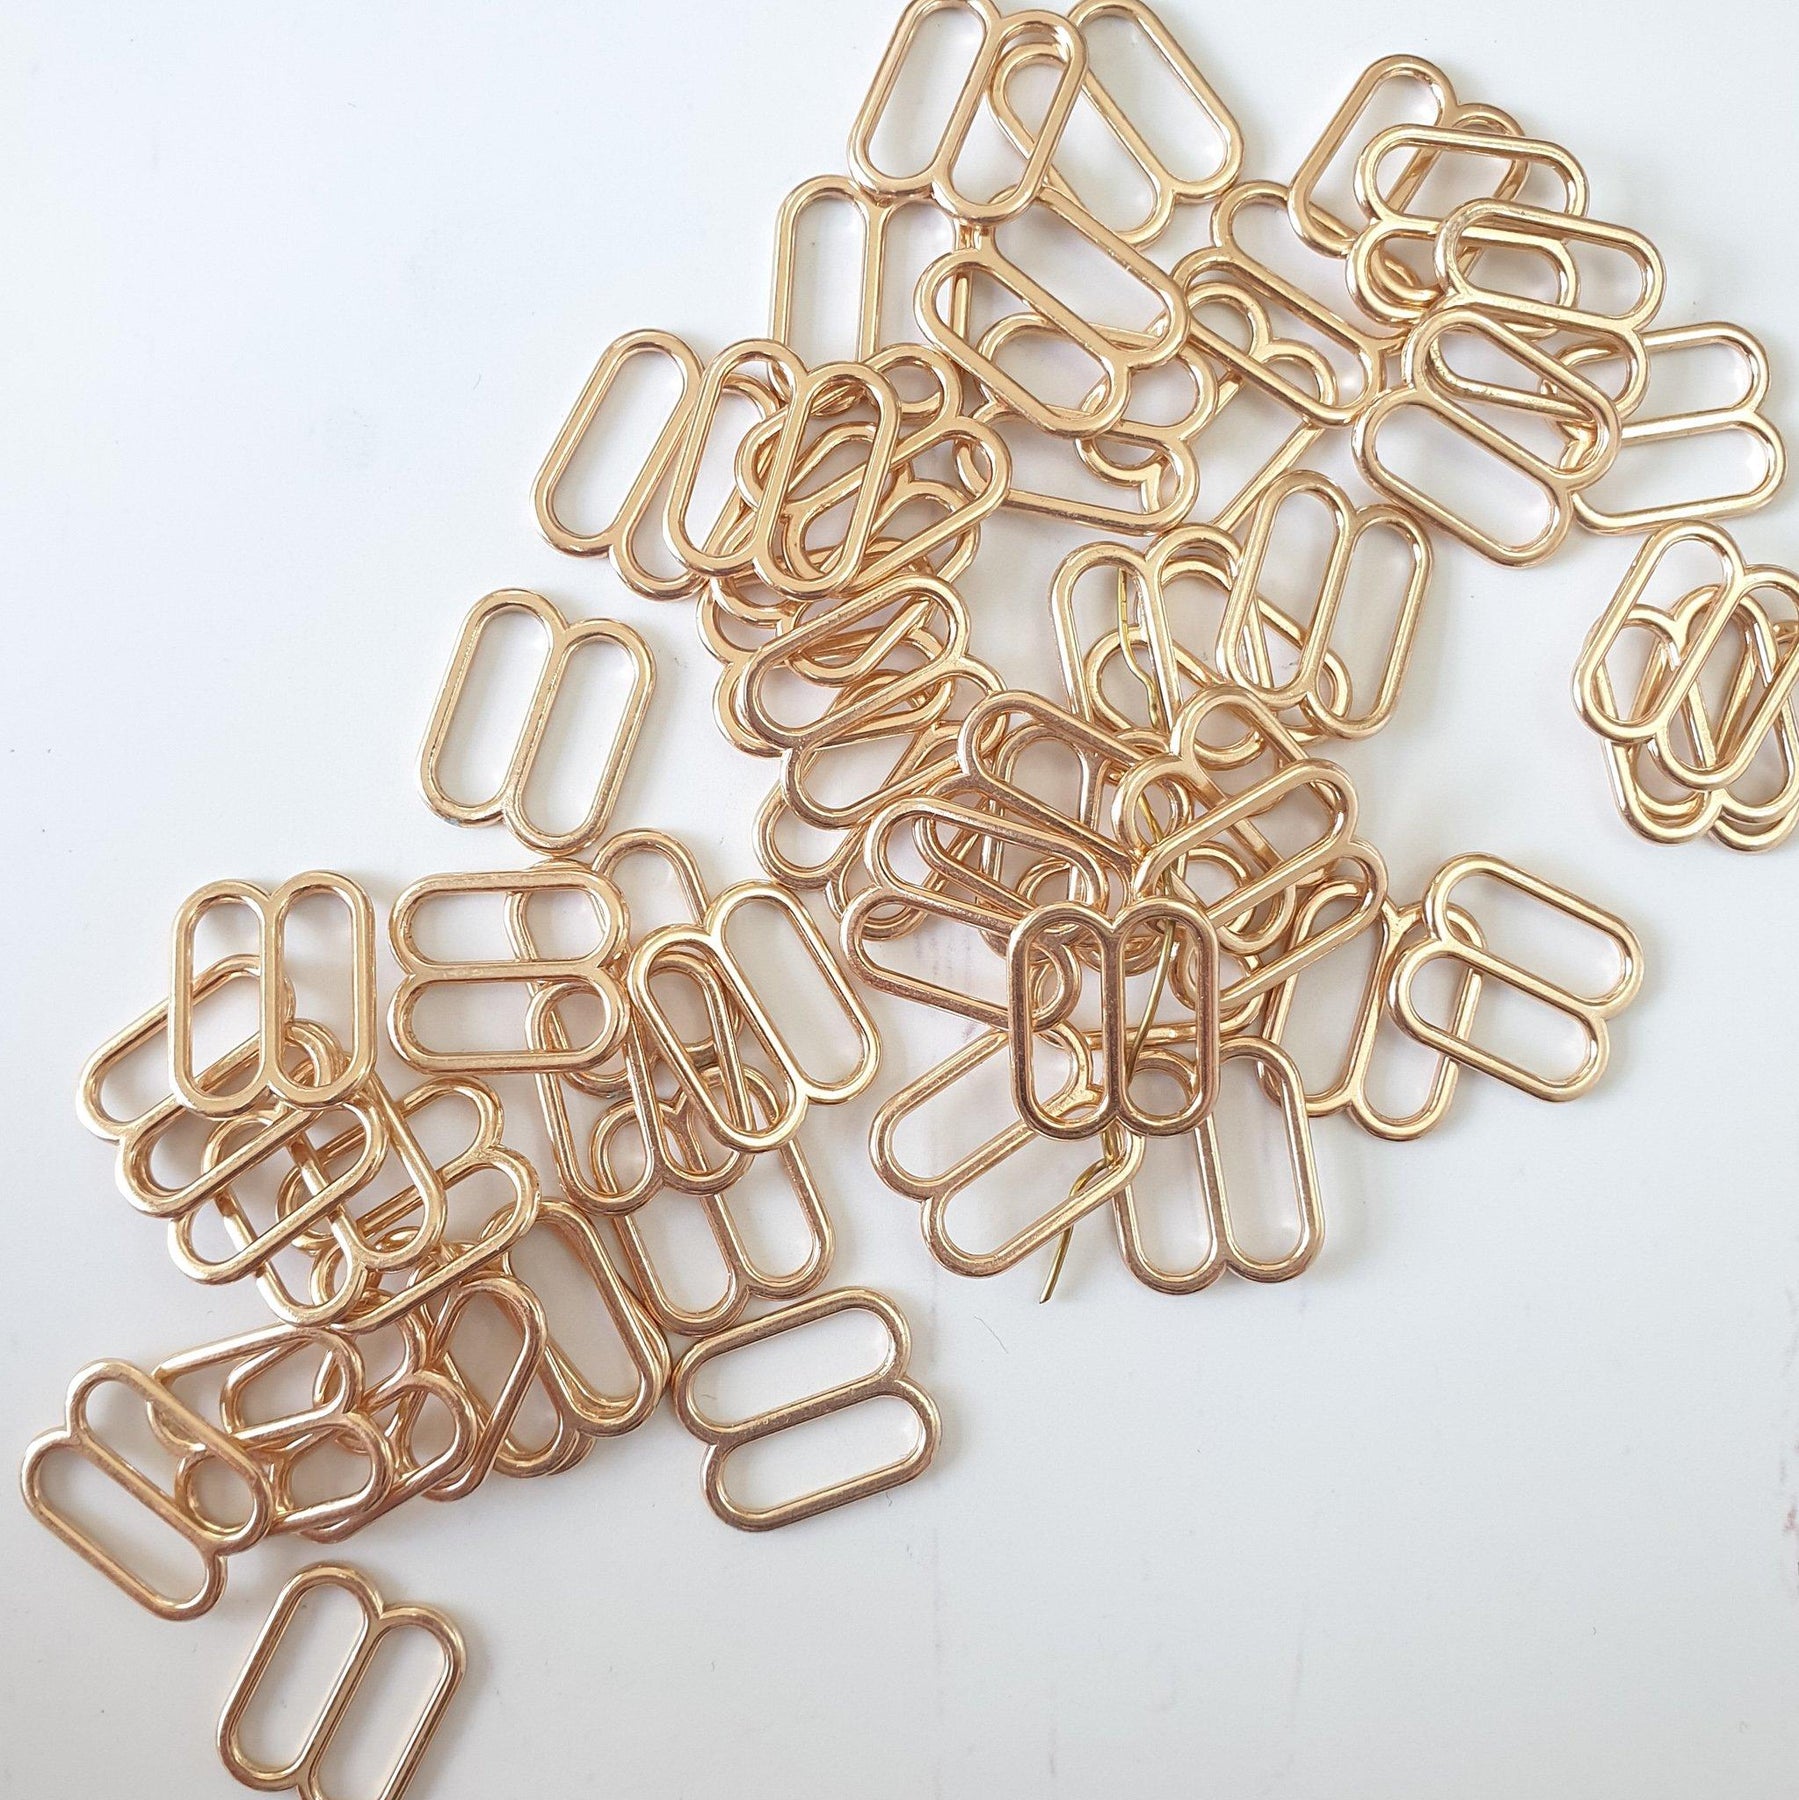 Rings and Sliders Premium Jewelry Quality Bra Making/Replacement Metal  Supplies Garment DIY Accessories (Rose Gold,10mm)